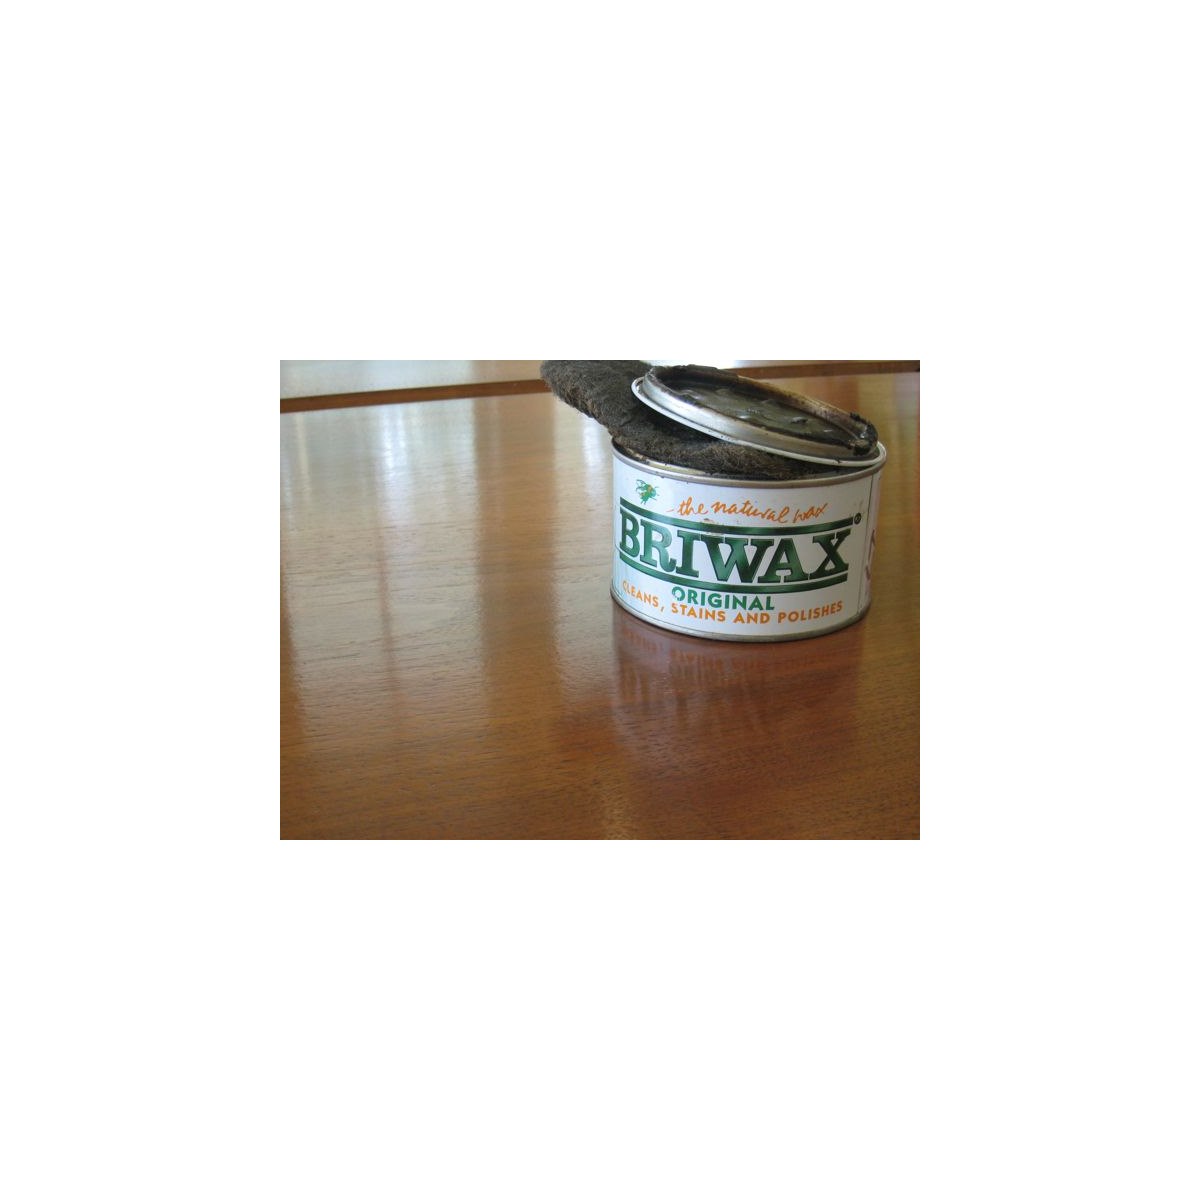 What is the Best Wax Furniture Polish